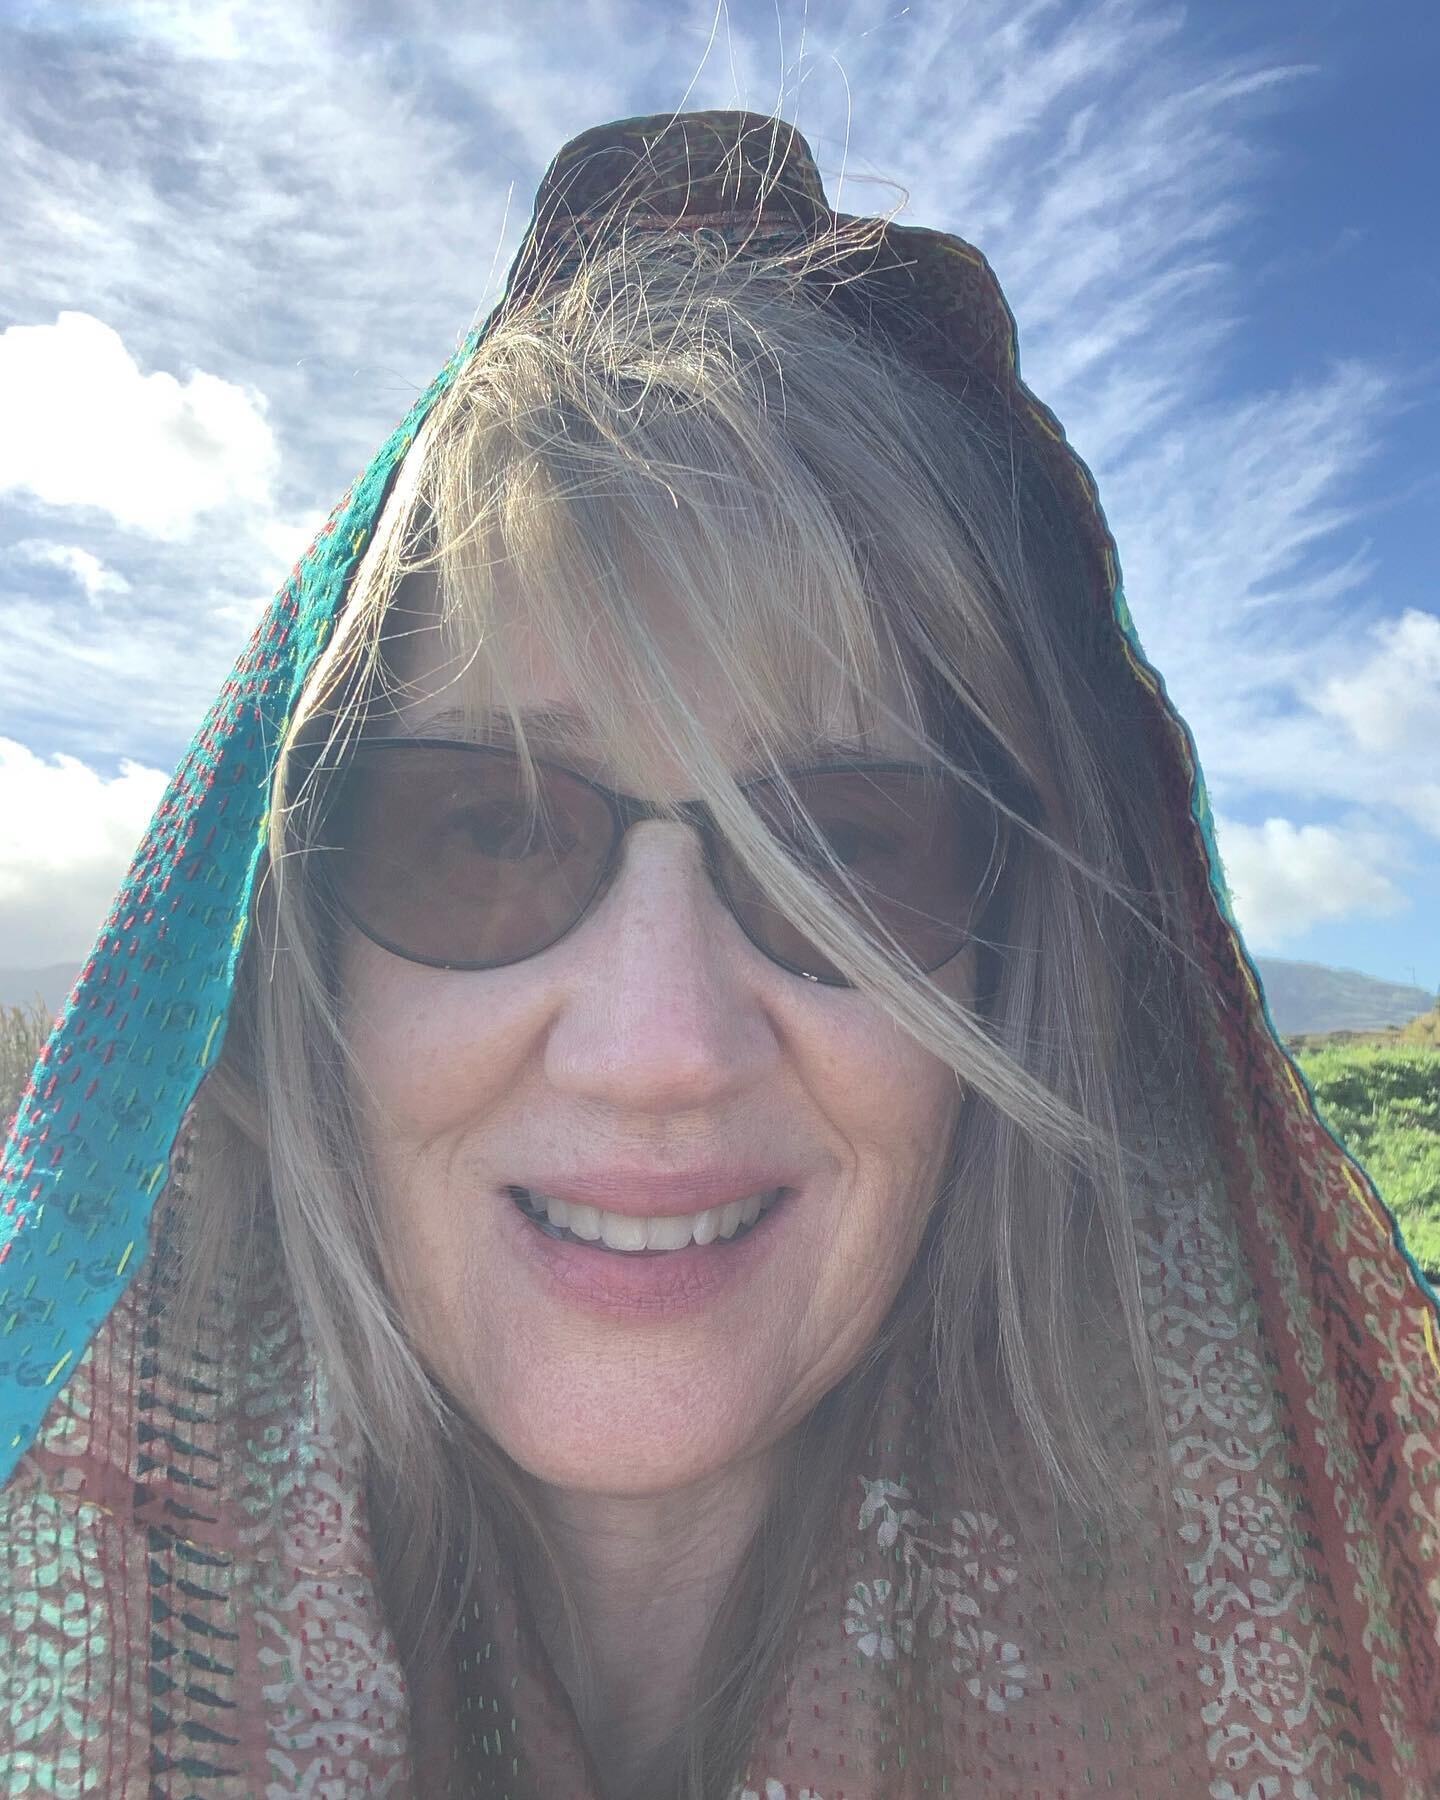 There&rsquo;s a perfect time and place for everything, so it wasn&rsquo;t too late for my first immersive yoga retreat after twenty-five years of teaching! What I thought might be a last hurrah, was a true reset. Thanks to all who made it happen, and